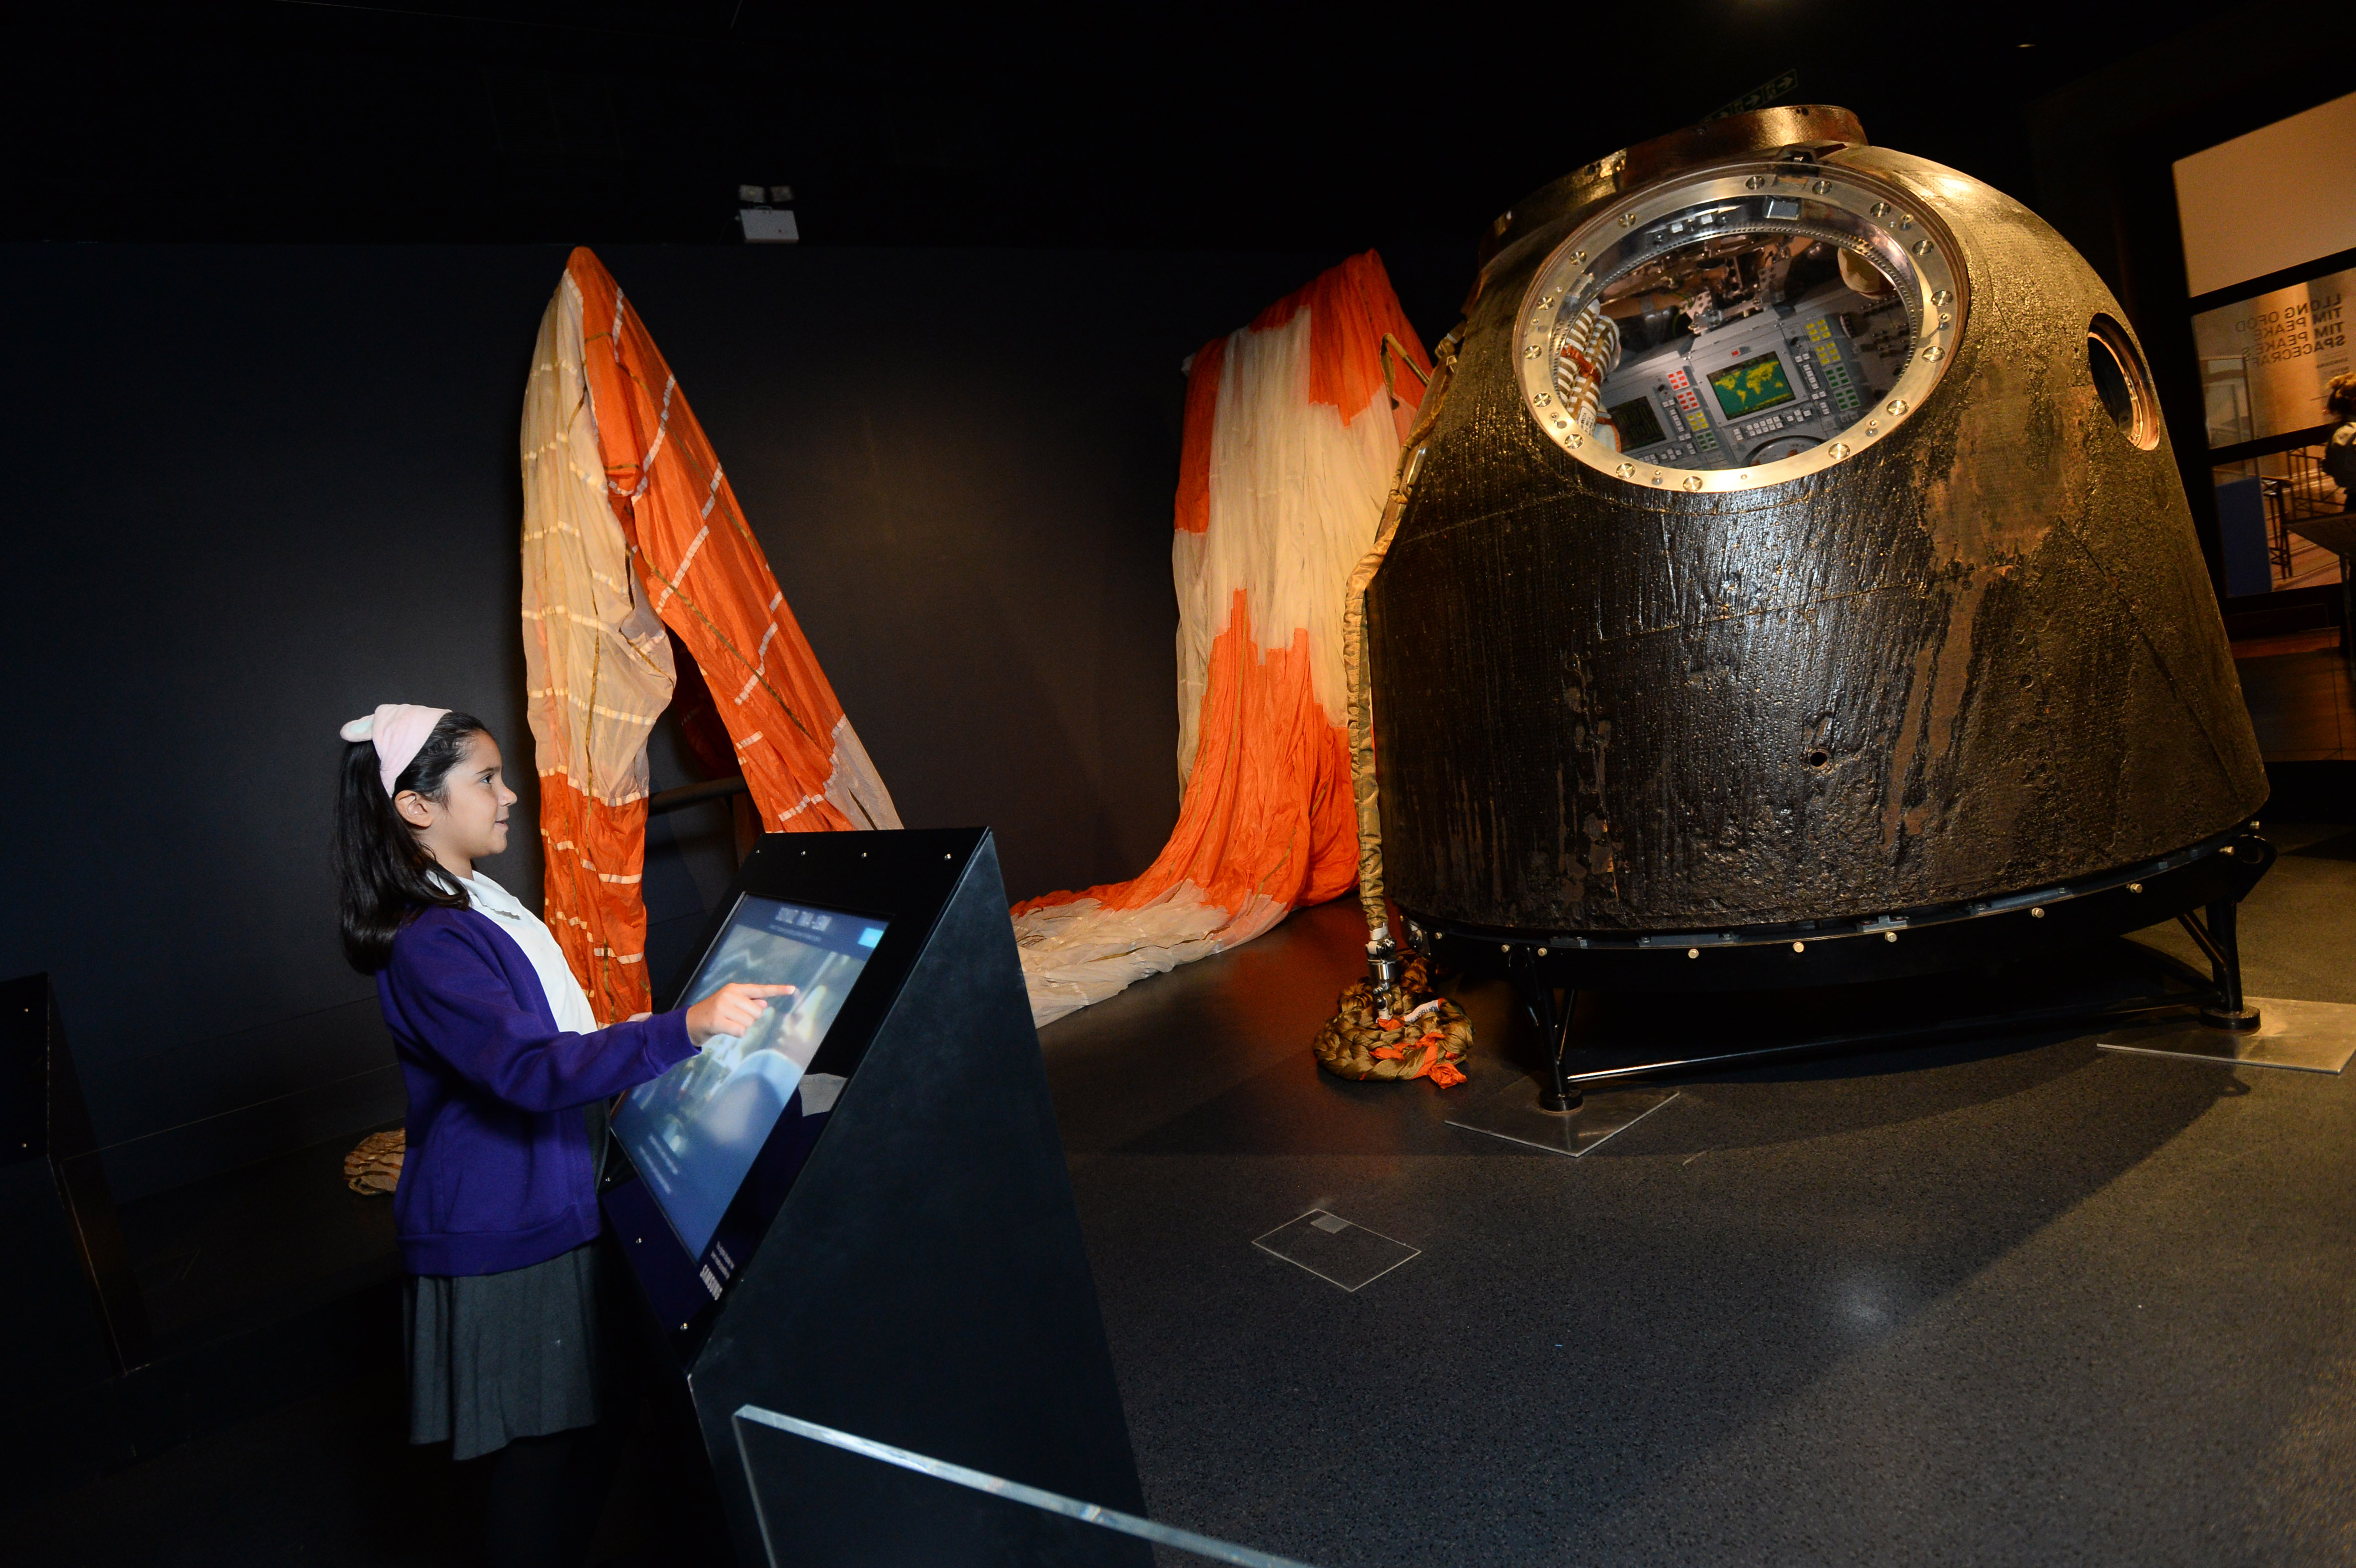 Tim Peake's spacecraft  has landed at National Museum Cardiff.

The exhibition which is part of a national tour presented by Science Museum Group and Samsung and is on display until the 10th Feb 2019.

Pictured here is Sisi Cowel from Ysgol Glan Morfa in Splott.

© WALES NEWS SERVICE